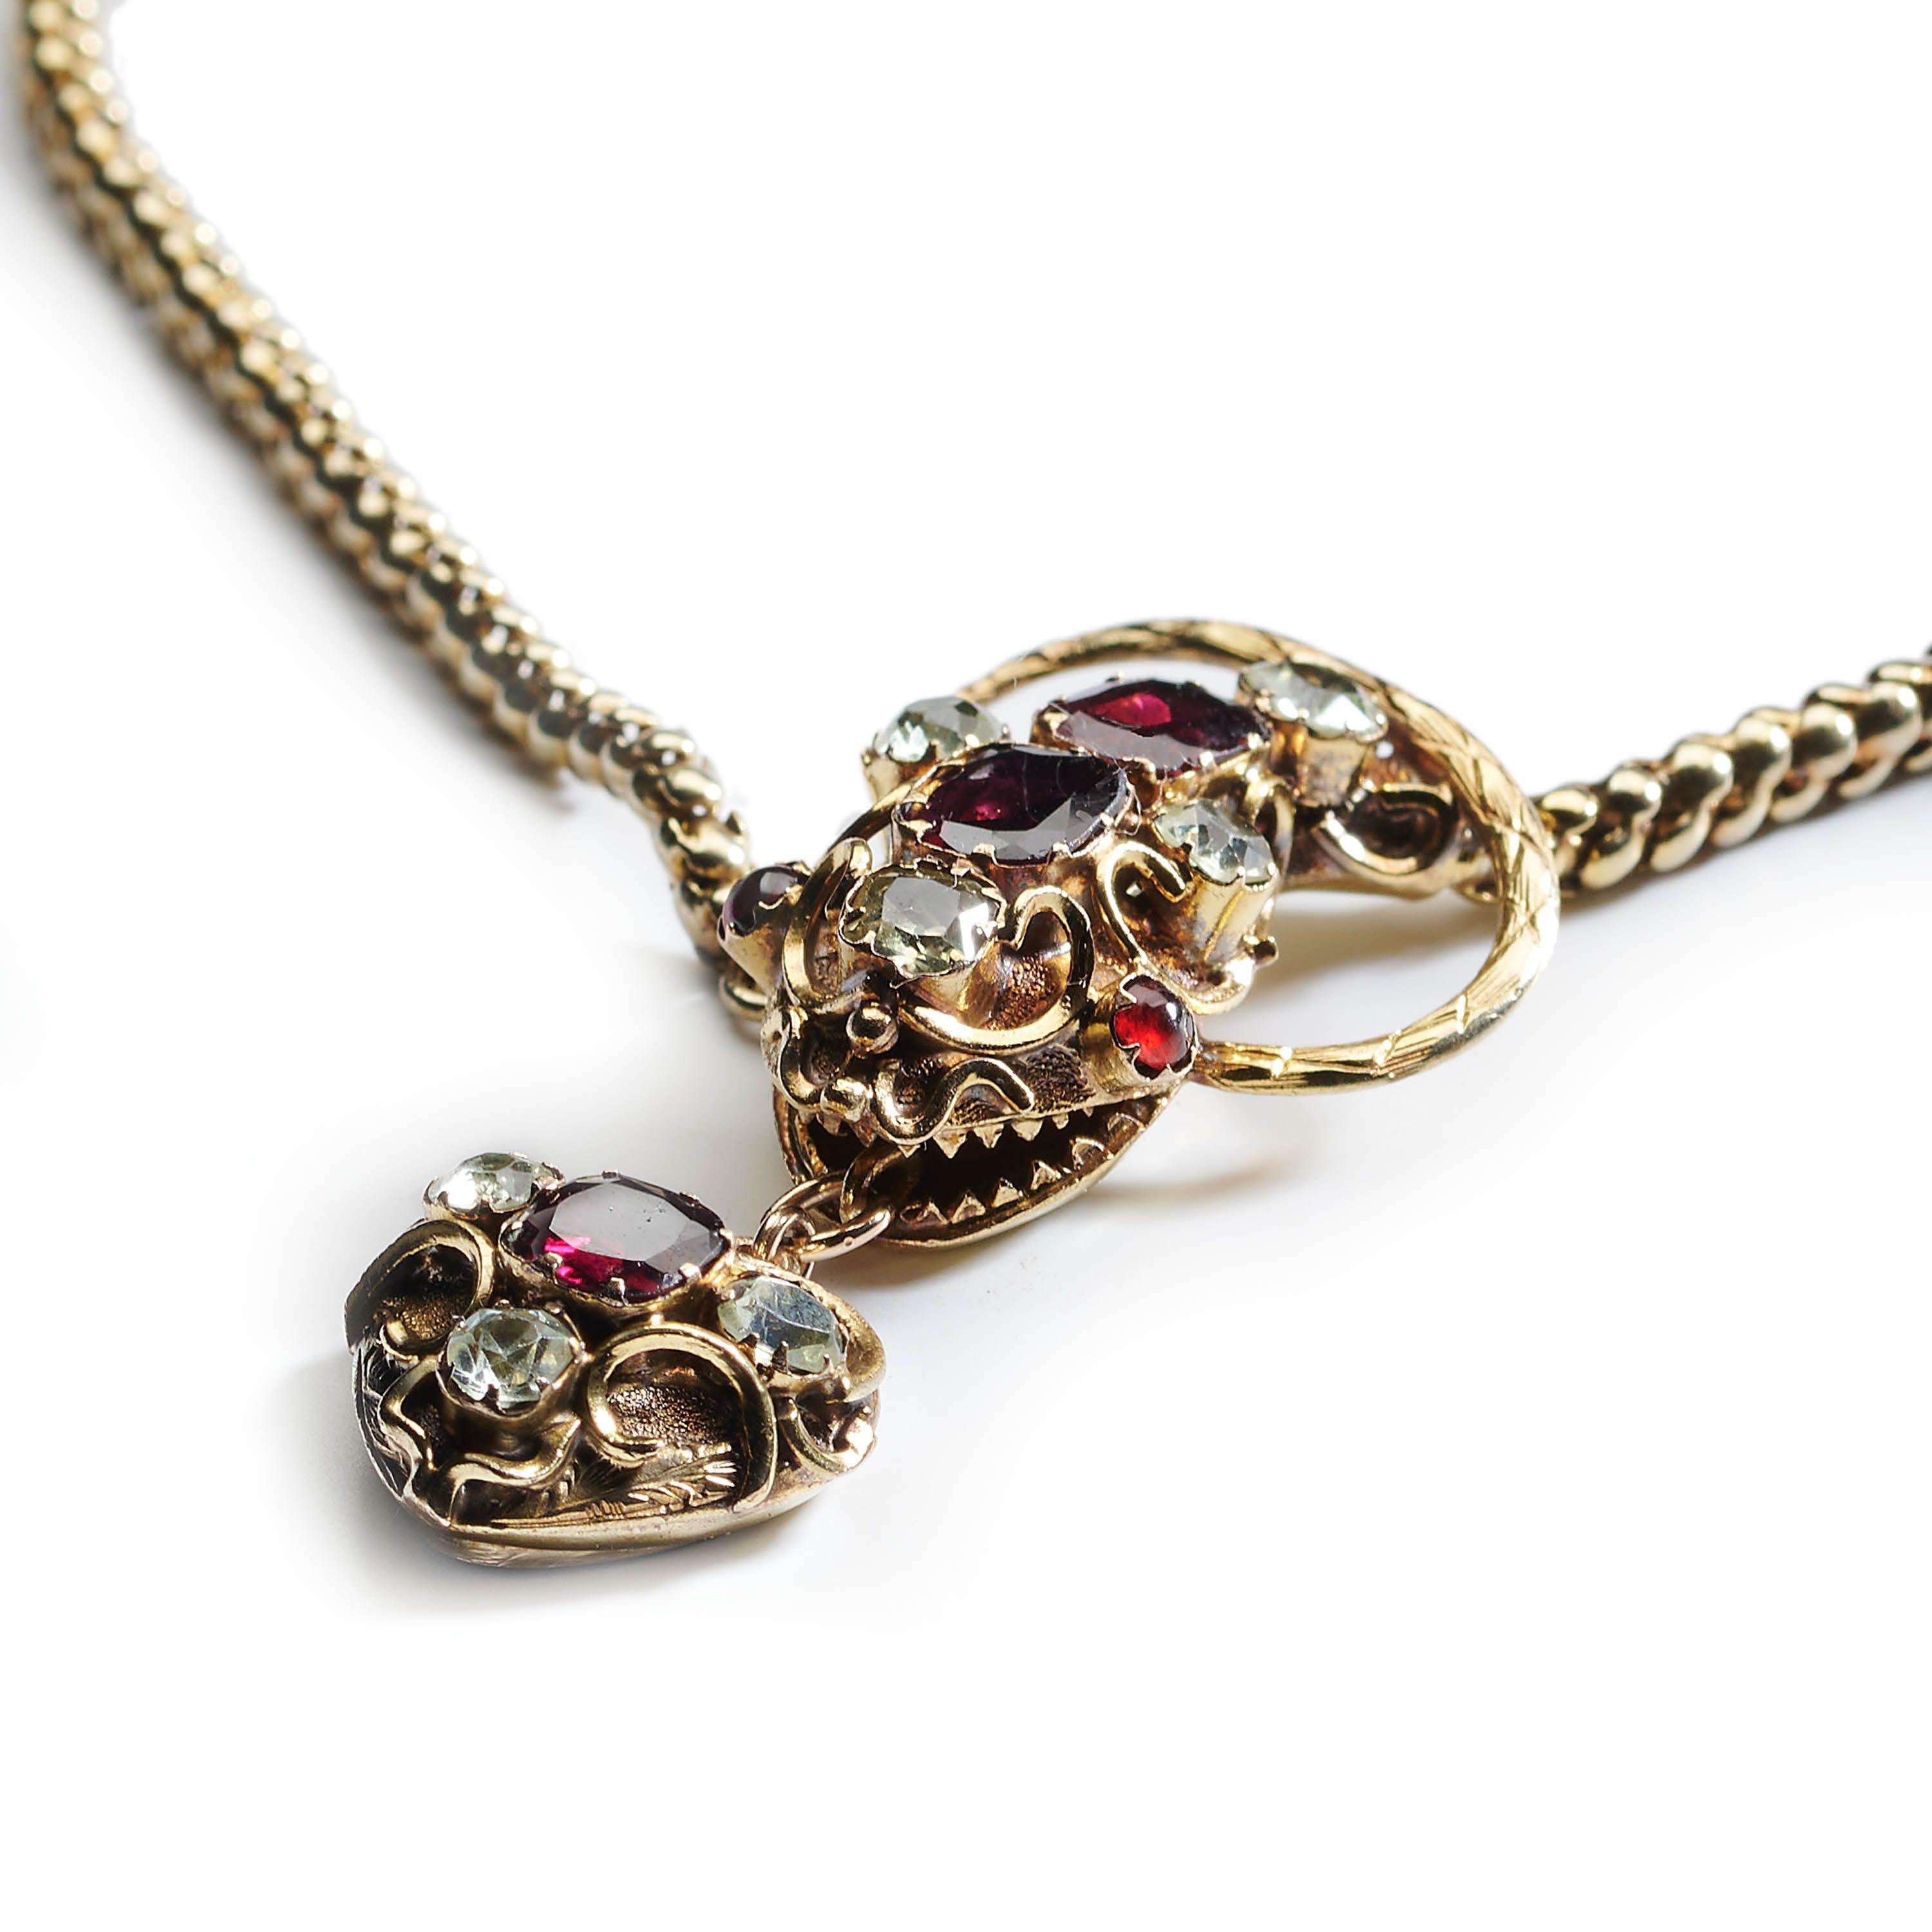 An early Victorian garnet, beryl, ruby and gold snake necklace, with cabochon-cut ruby eyes, with faceted garnets and pale green beryls set in the head and heart pendant, in closed back claw settings, surrounded by scrolling wirework, the mouth is